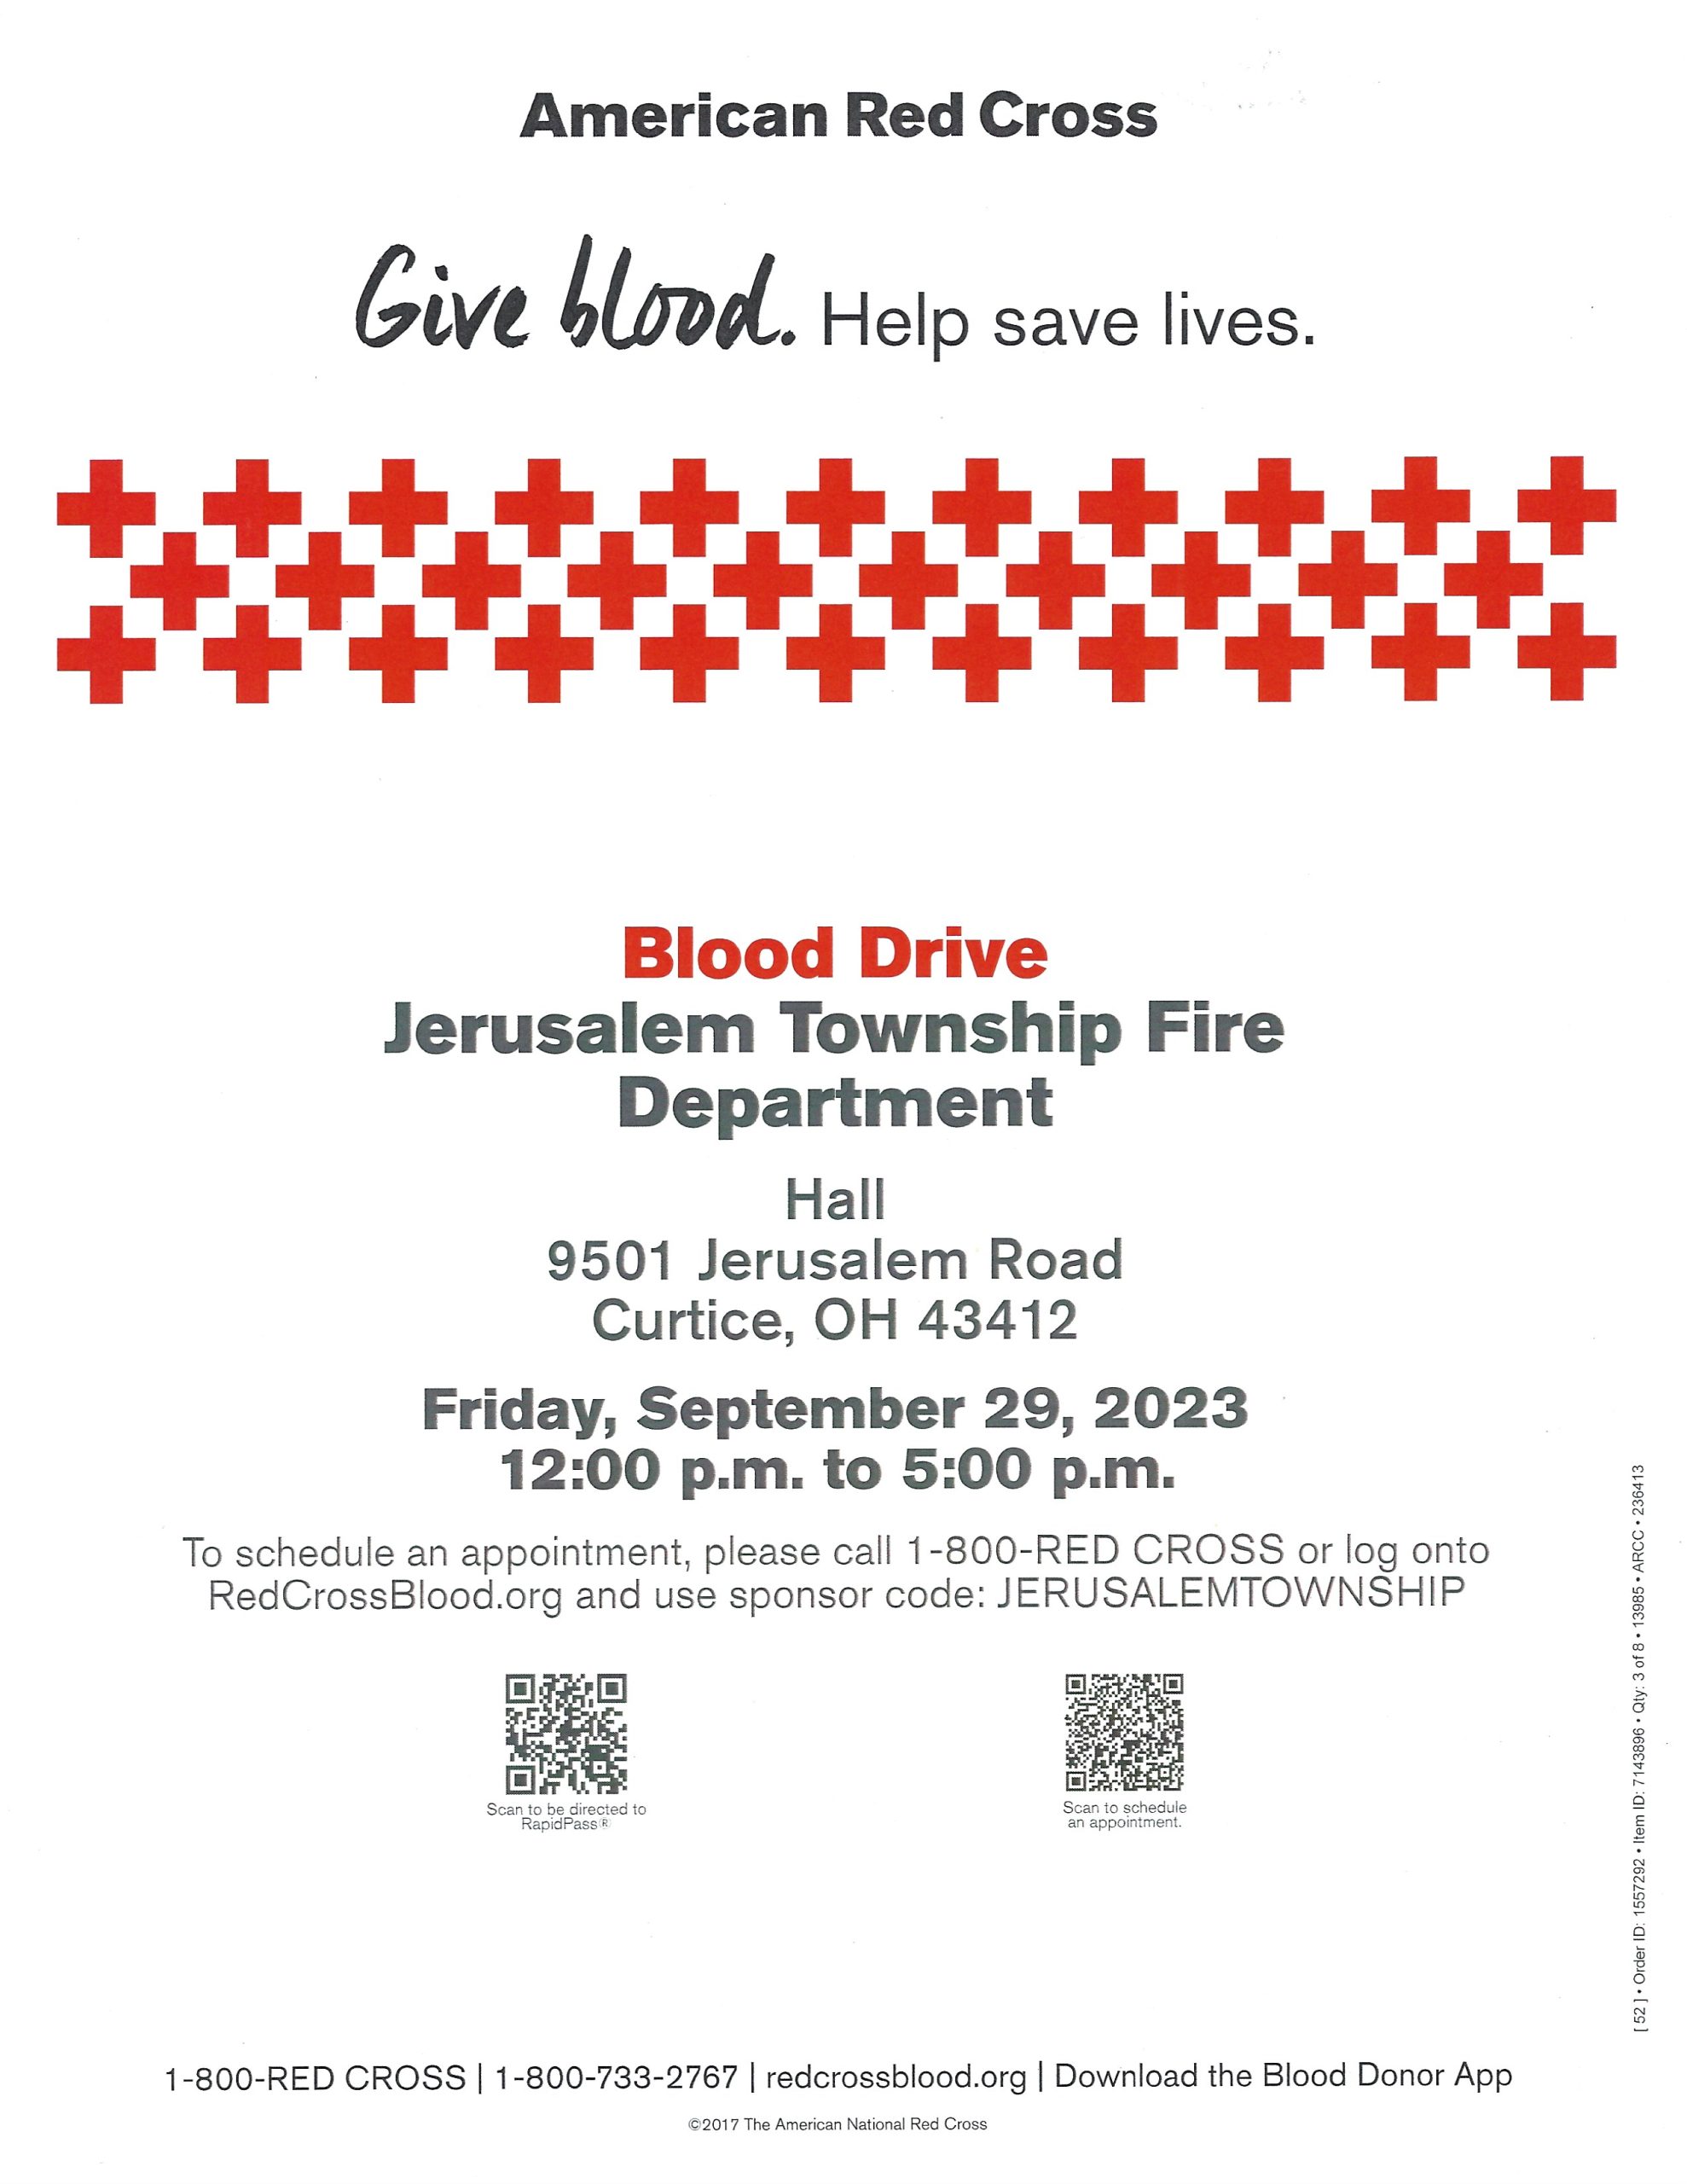 American Red Cross Blood Drive At The Jerusalem Township Fire Department from Noon to 5PM